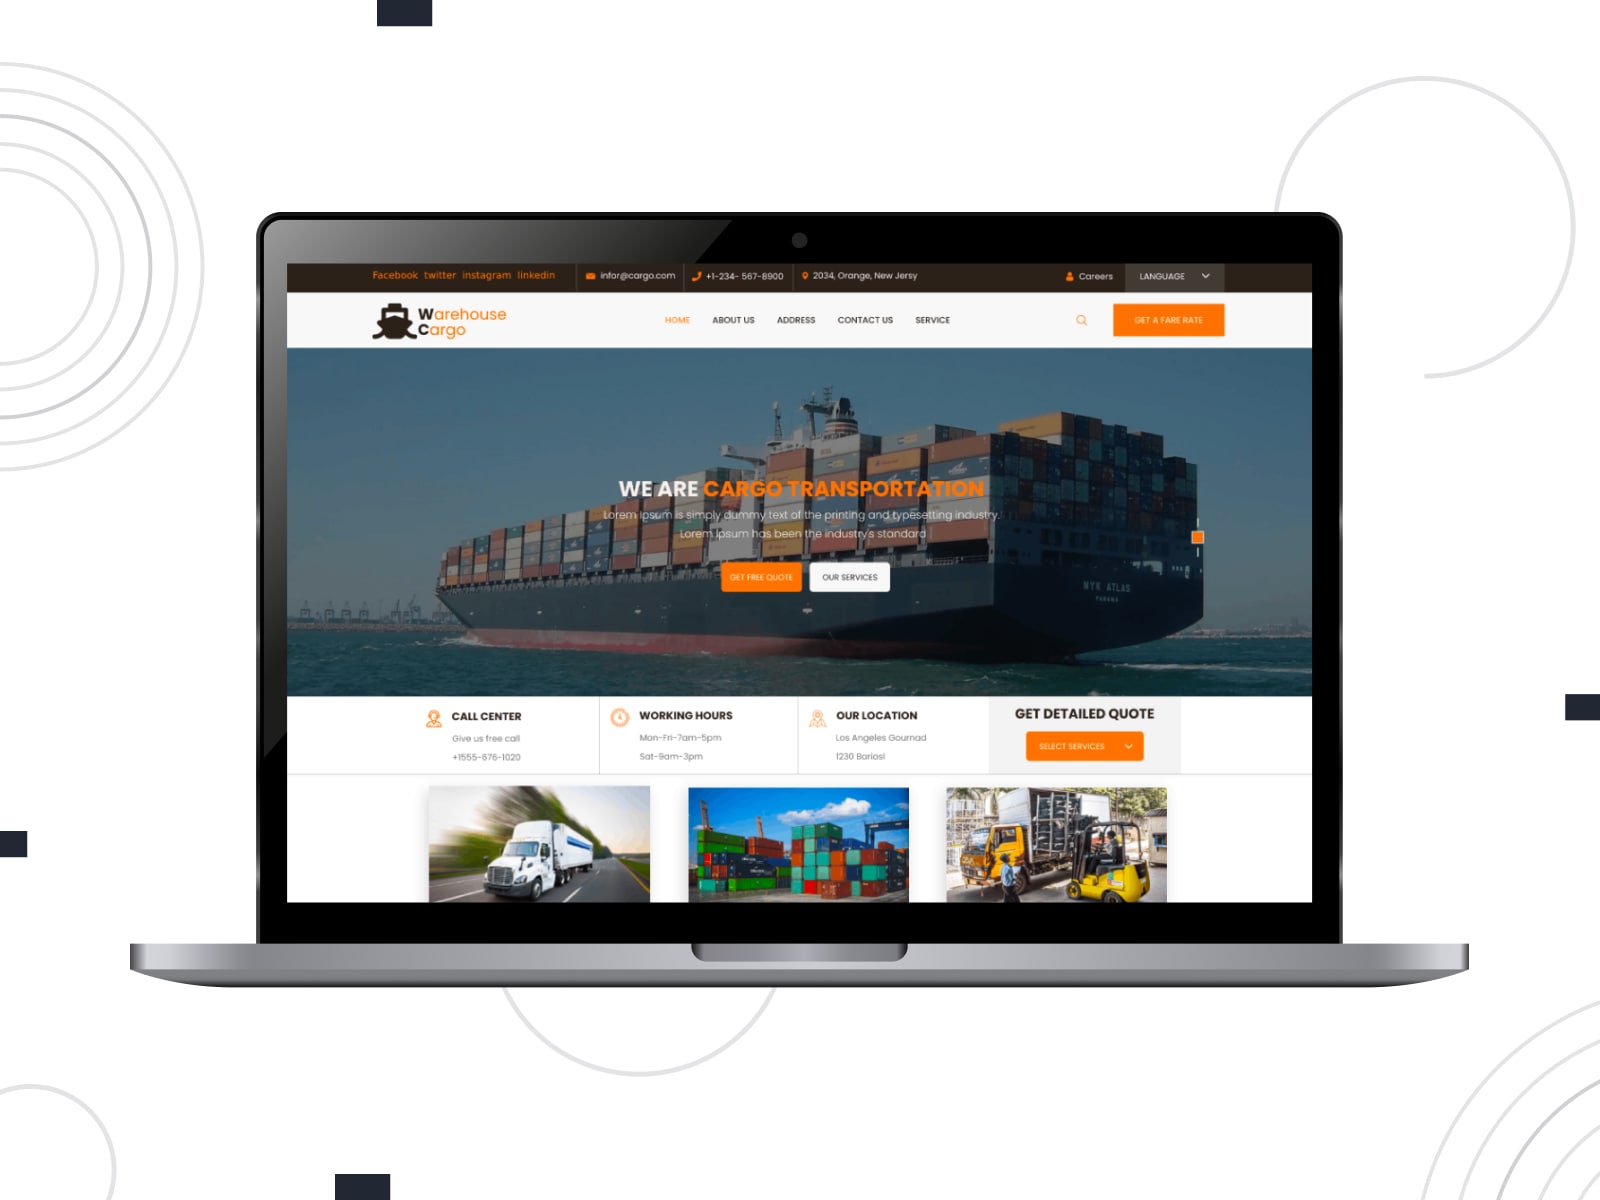 Collage of the Warehouse Cargo free WordPrss theme demo page in white, orange and blue colors.